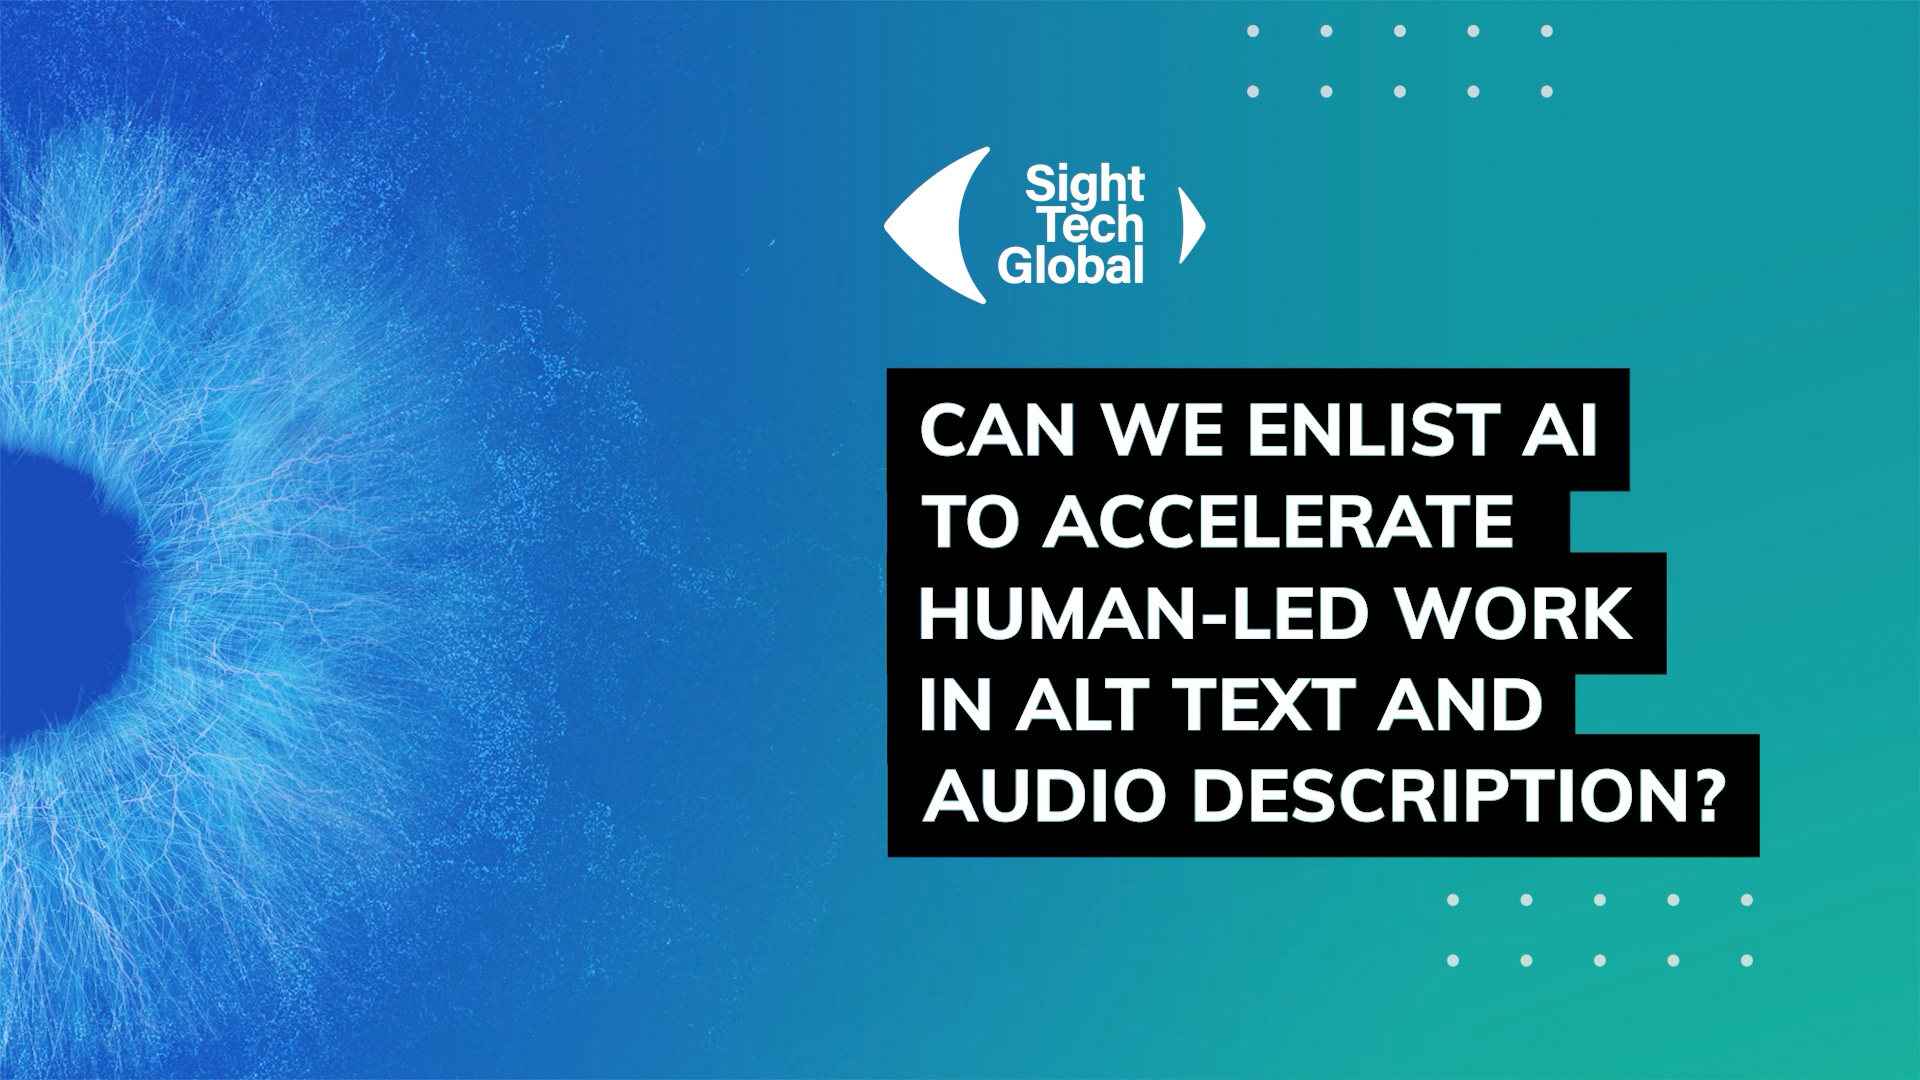 Can we enlist AI to accelerate human-led work in alt text and audio description?